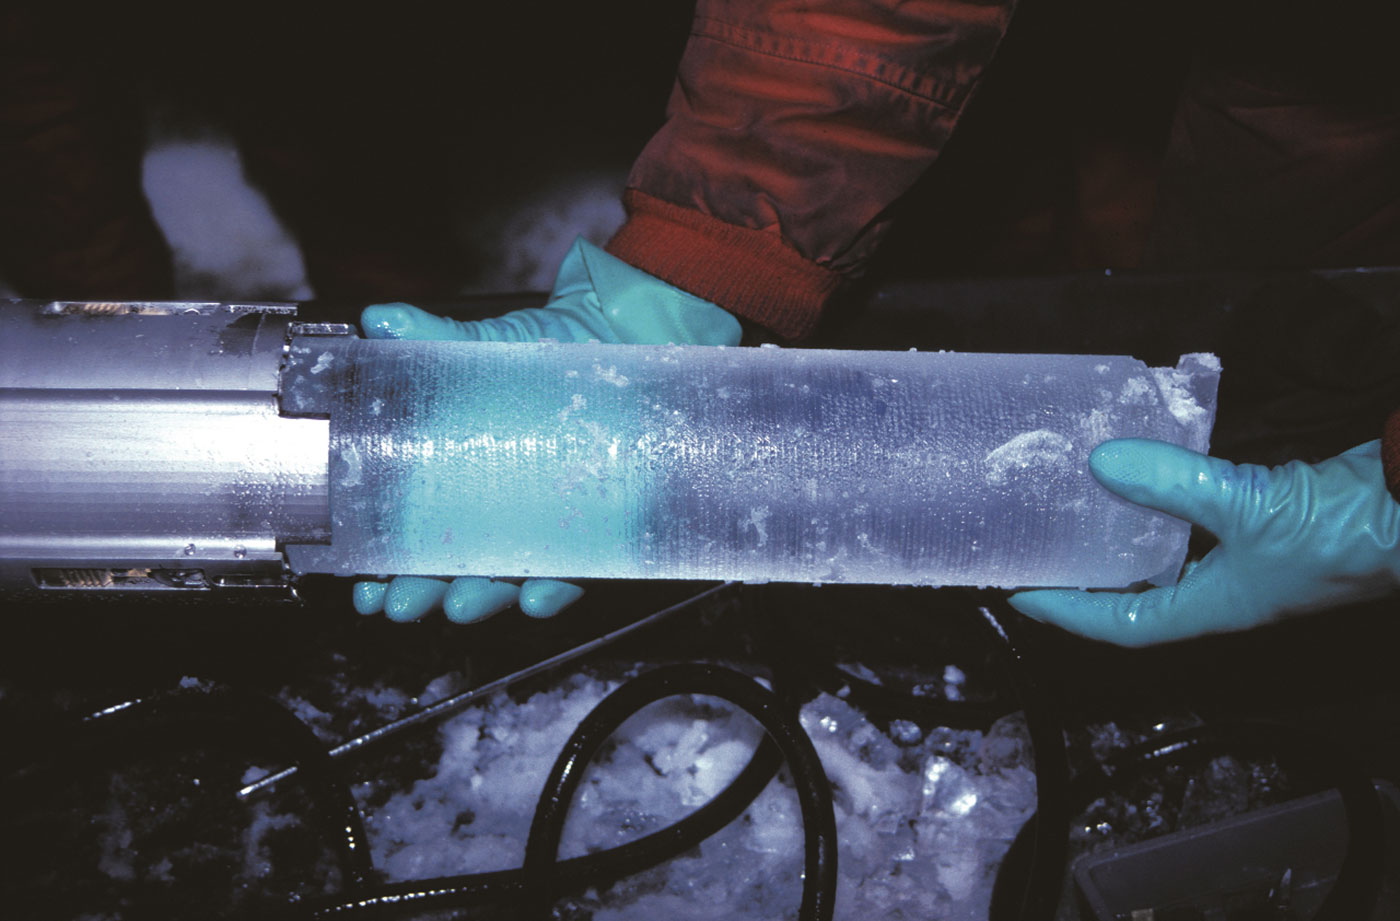 Pair of hands holding an ice core. - click to view larger image